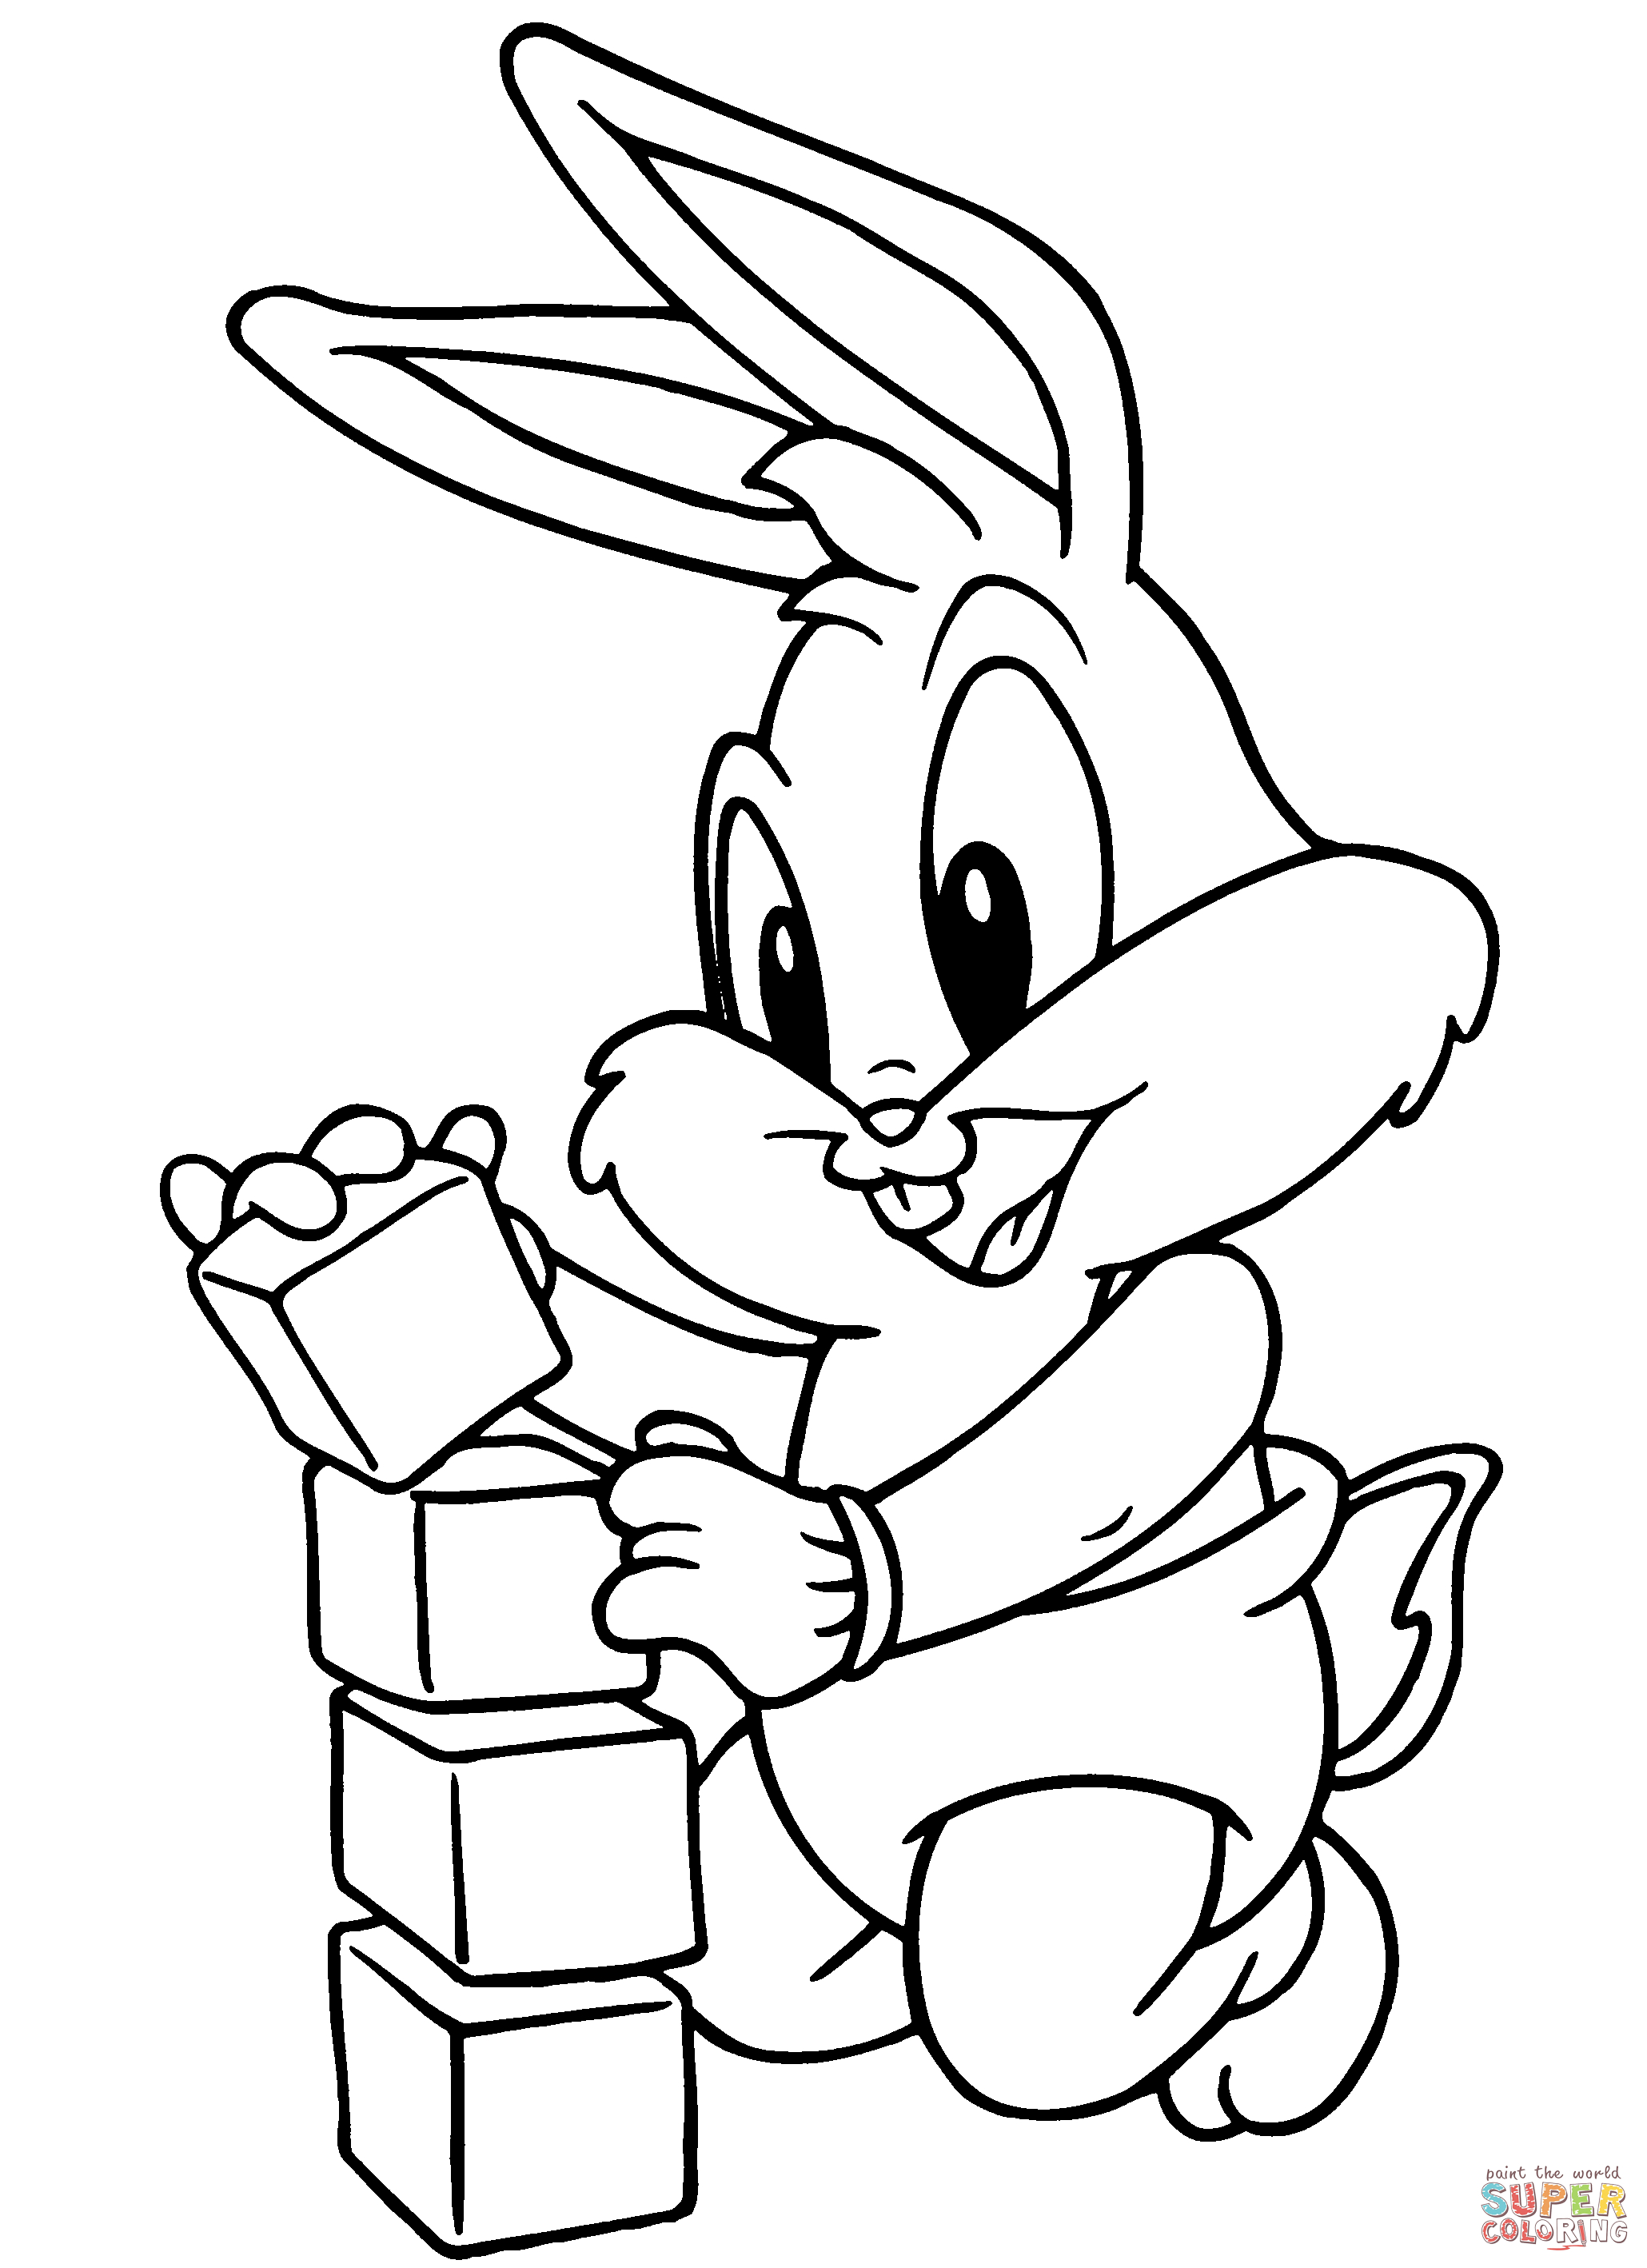 Bugs Bunny Coloring Pages | Free Coloring Pages - Free Printable Bugs Bunny Coloring Pages